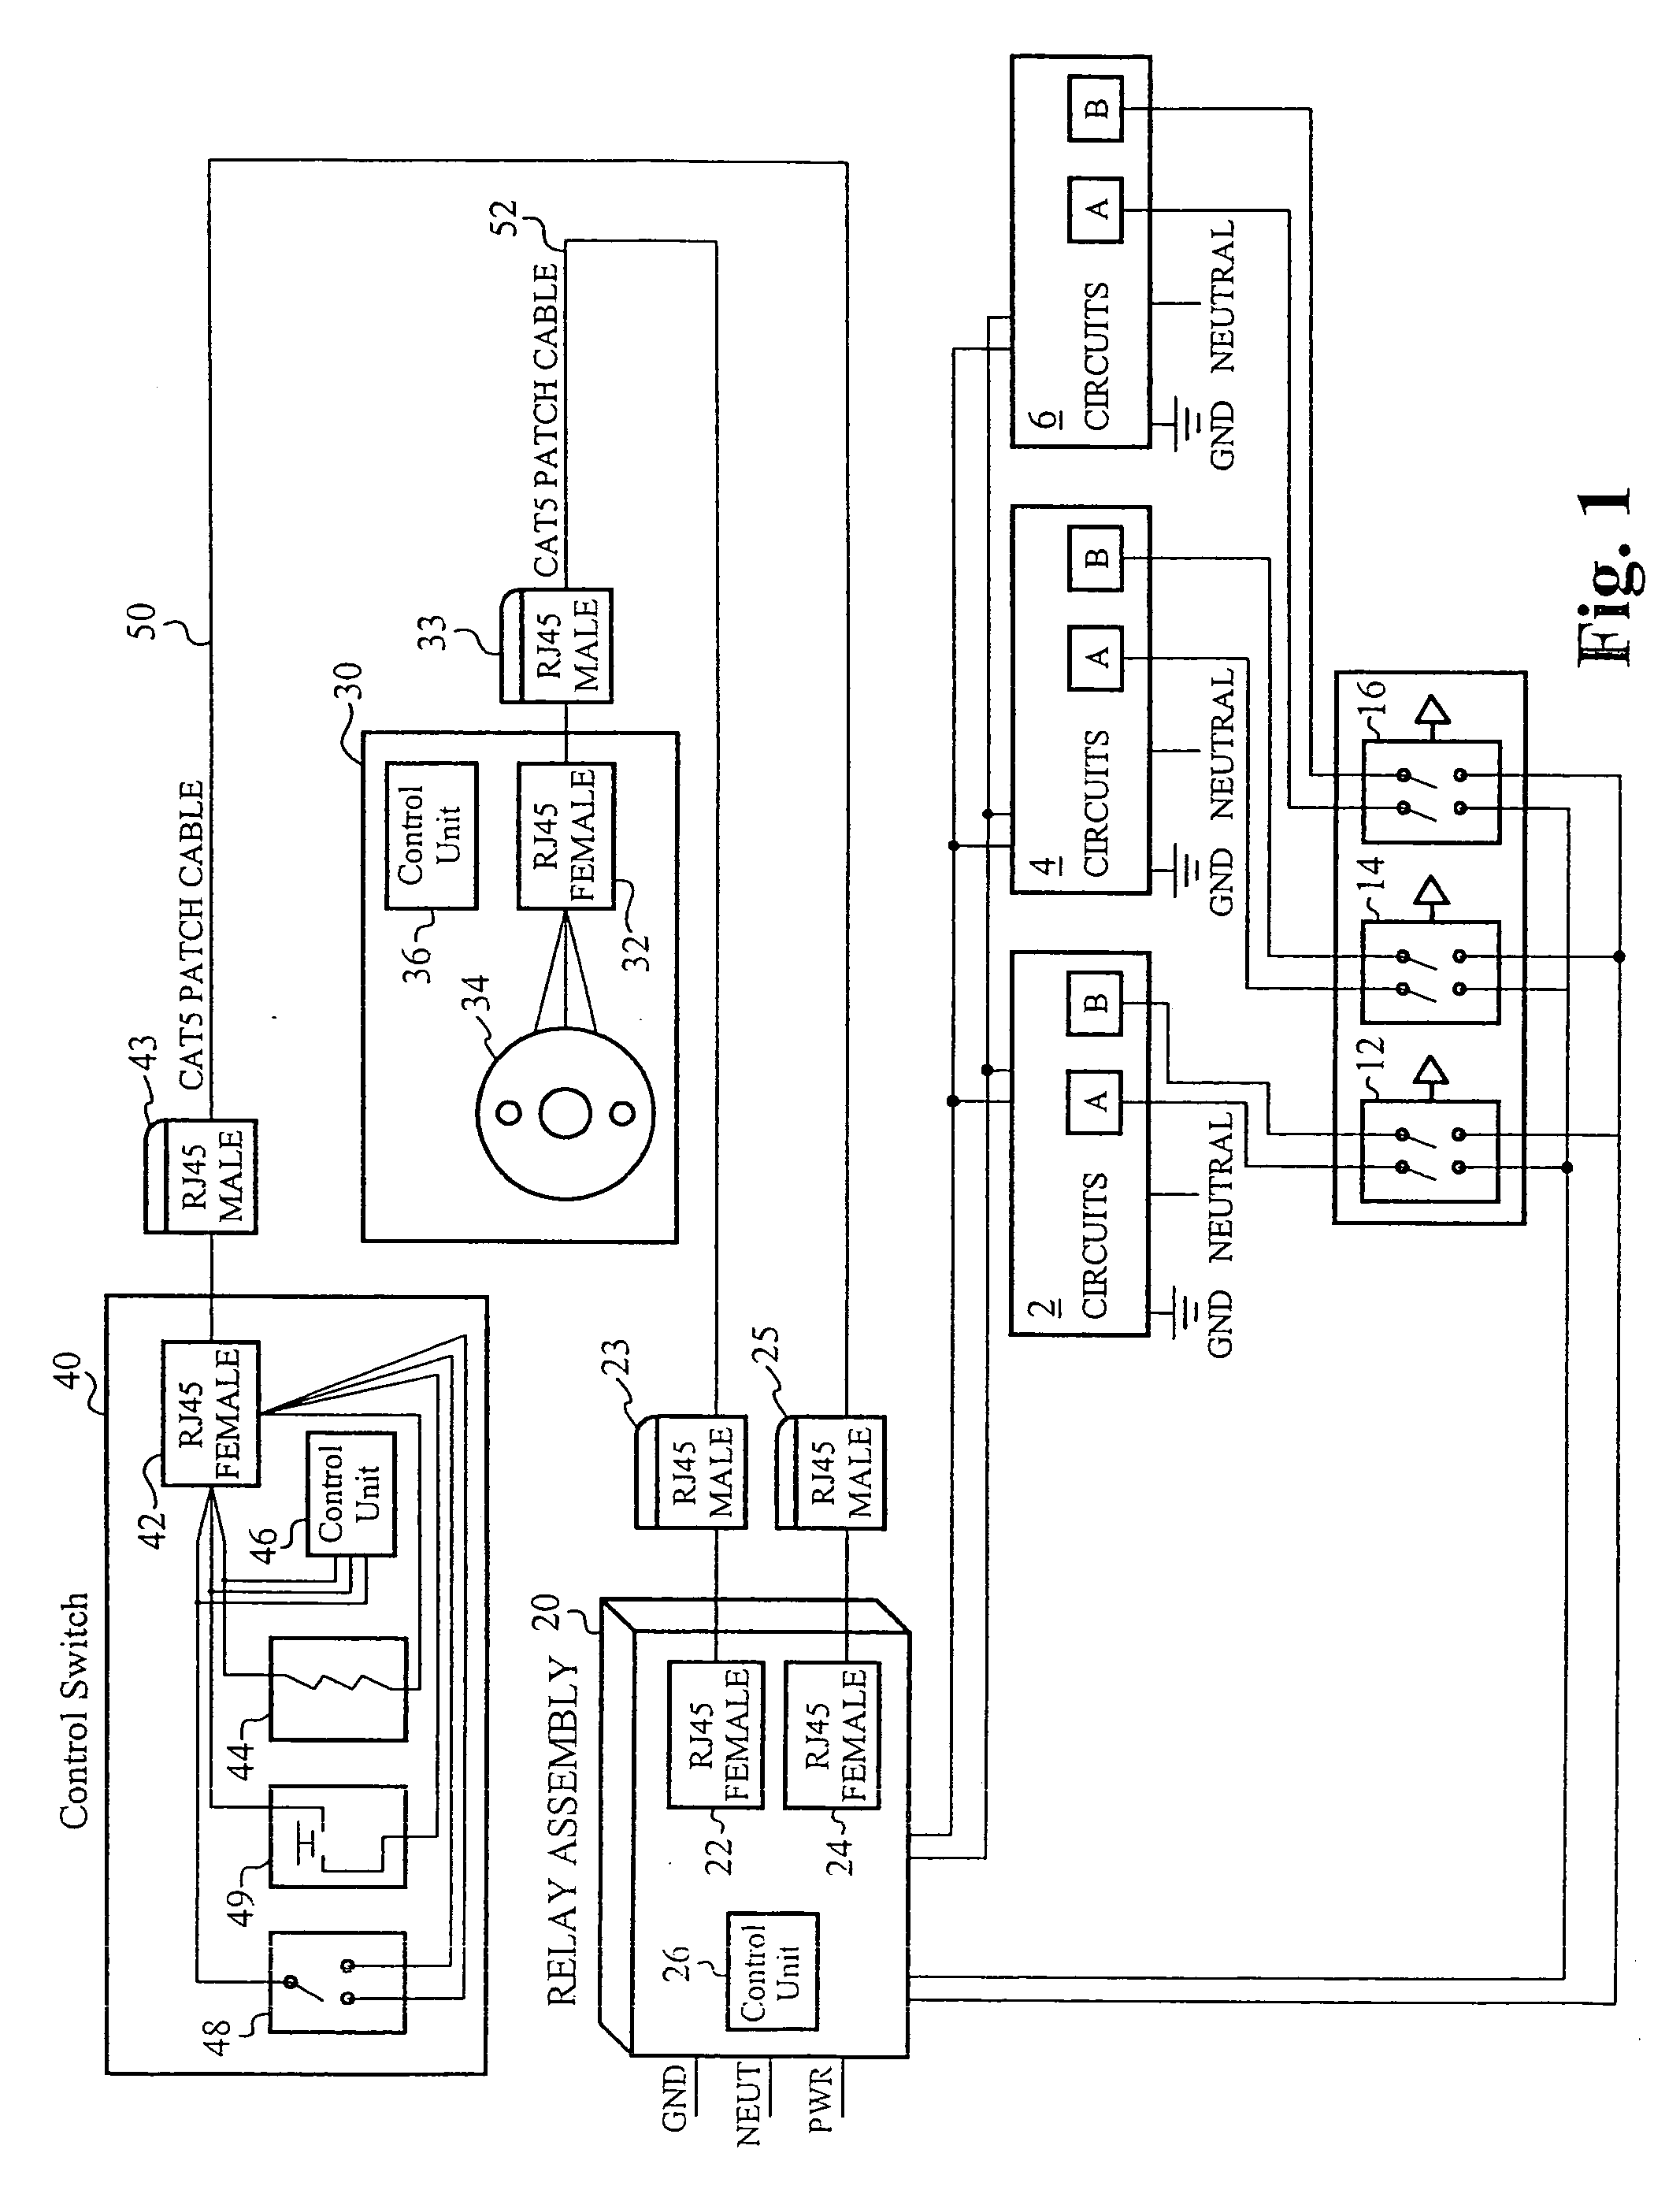 System and architecture for controlling lighting through a low-voltage bus